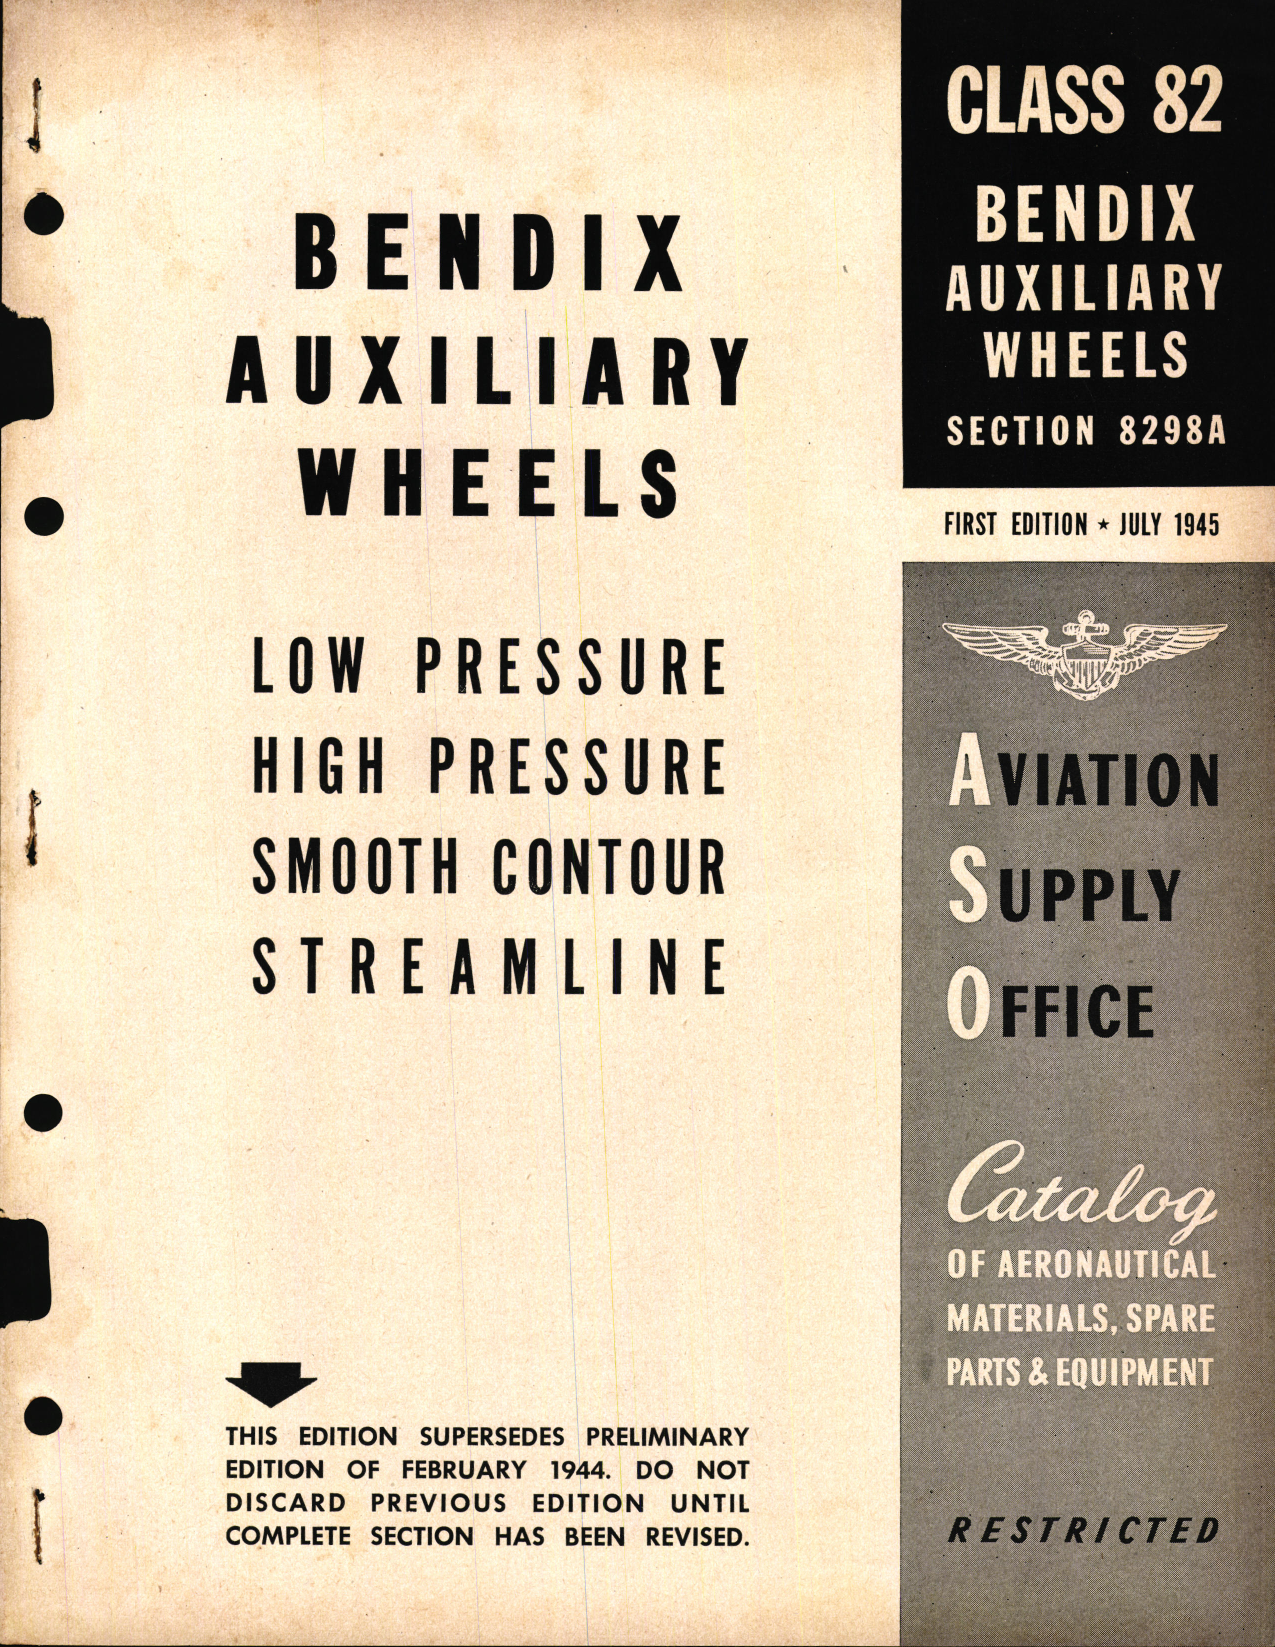 Sample page 1 from AirCorps Library document: Bendix Auxiliary wheels, Low Pressure, High Pressure, Smooth Contour, Streamline